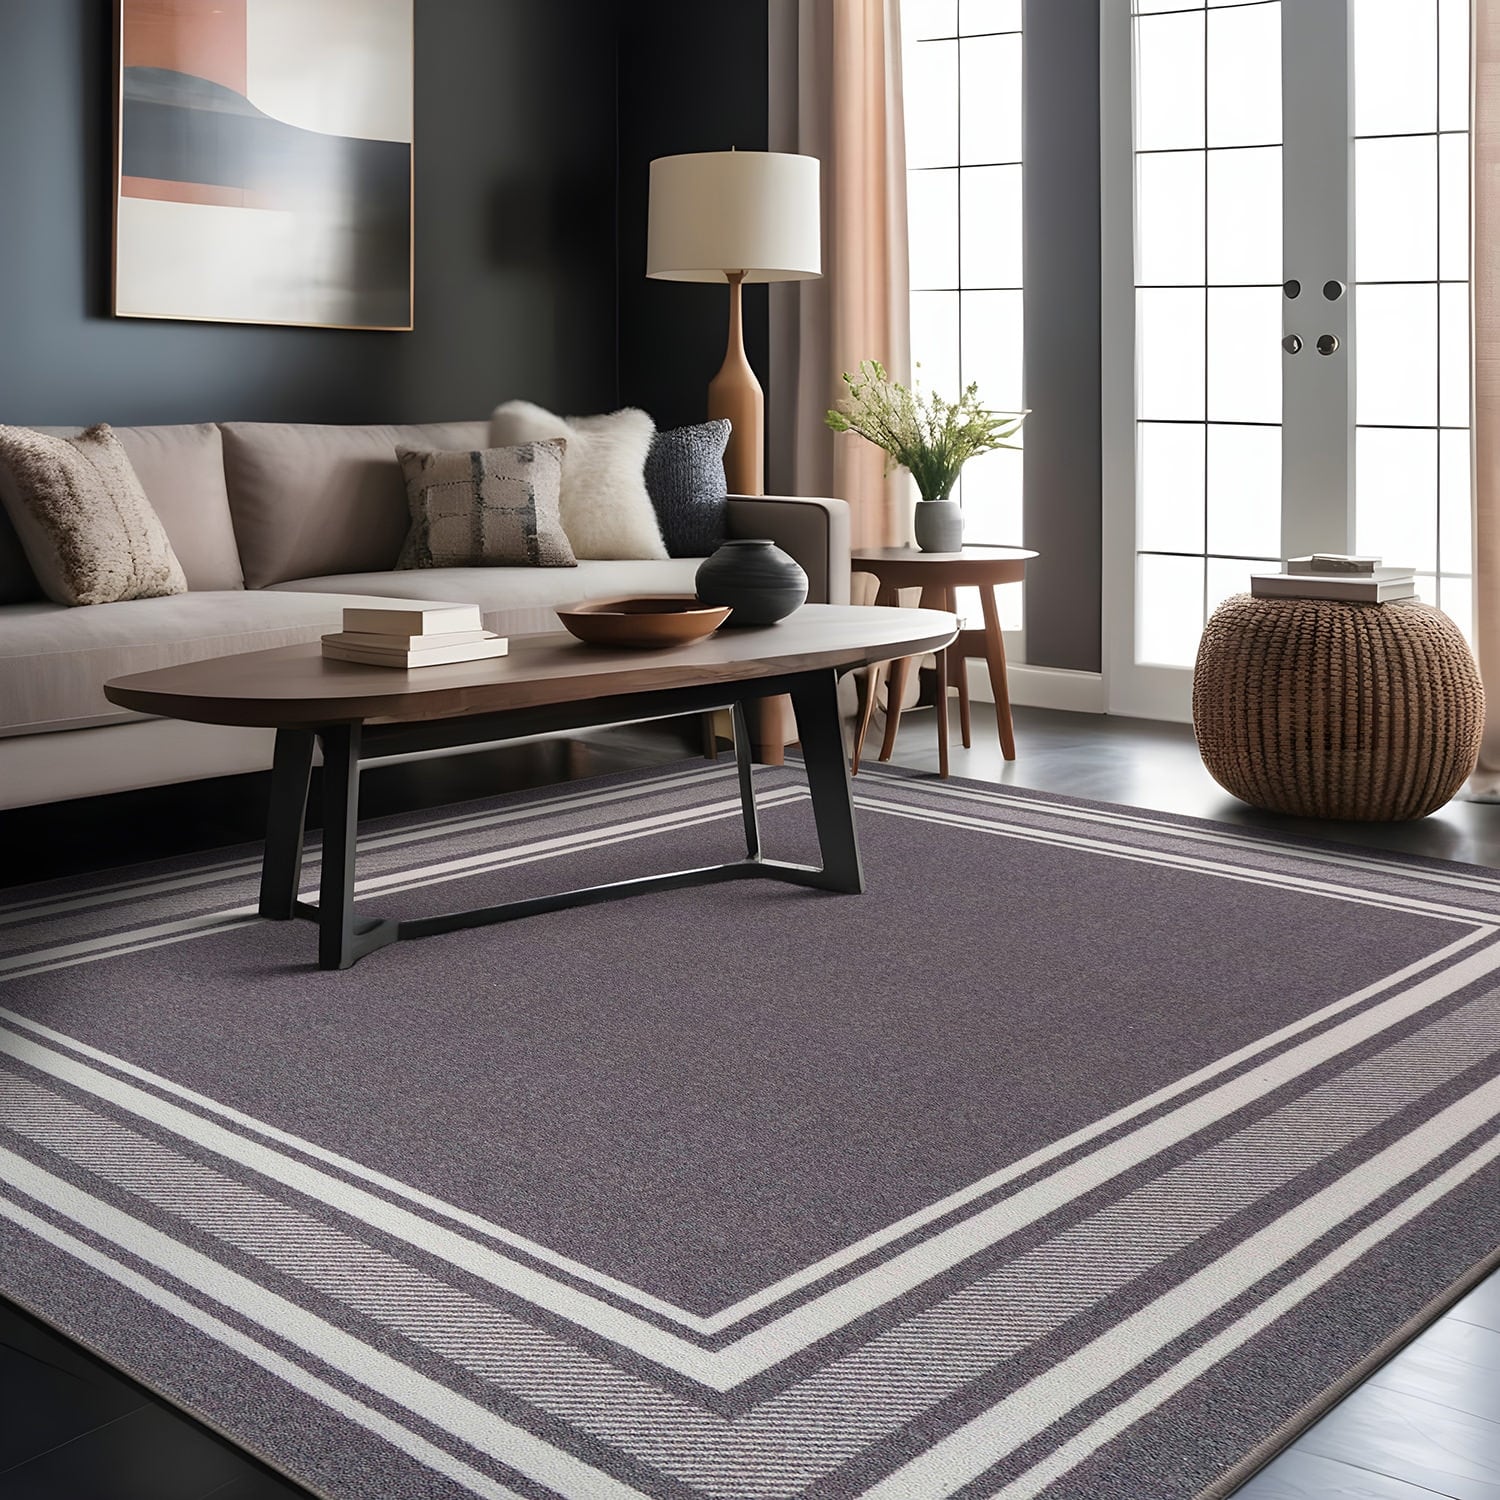 https://ak1.ostkcdn.com/images/products/is/images/direct/ddcbbd51790e2bb2f7ea153af5d2cbb5411ca63e/Beverly-Rug-Non-Slip-Indoor-Rugs-for-Living-Room-Bordered-Area-Rug-Blue-8X10.jpg